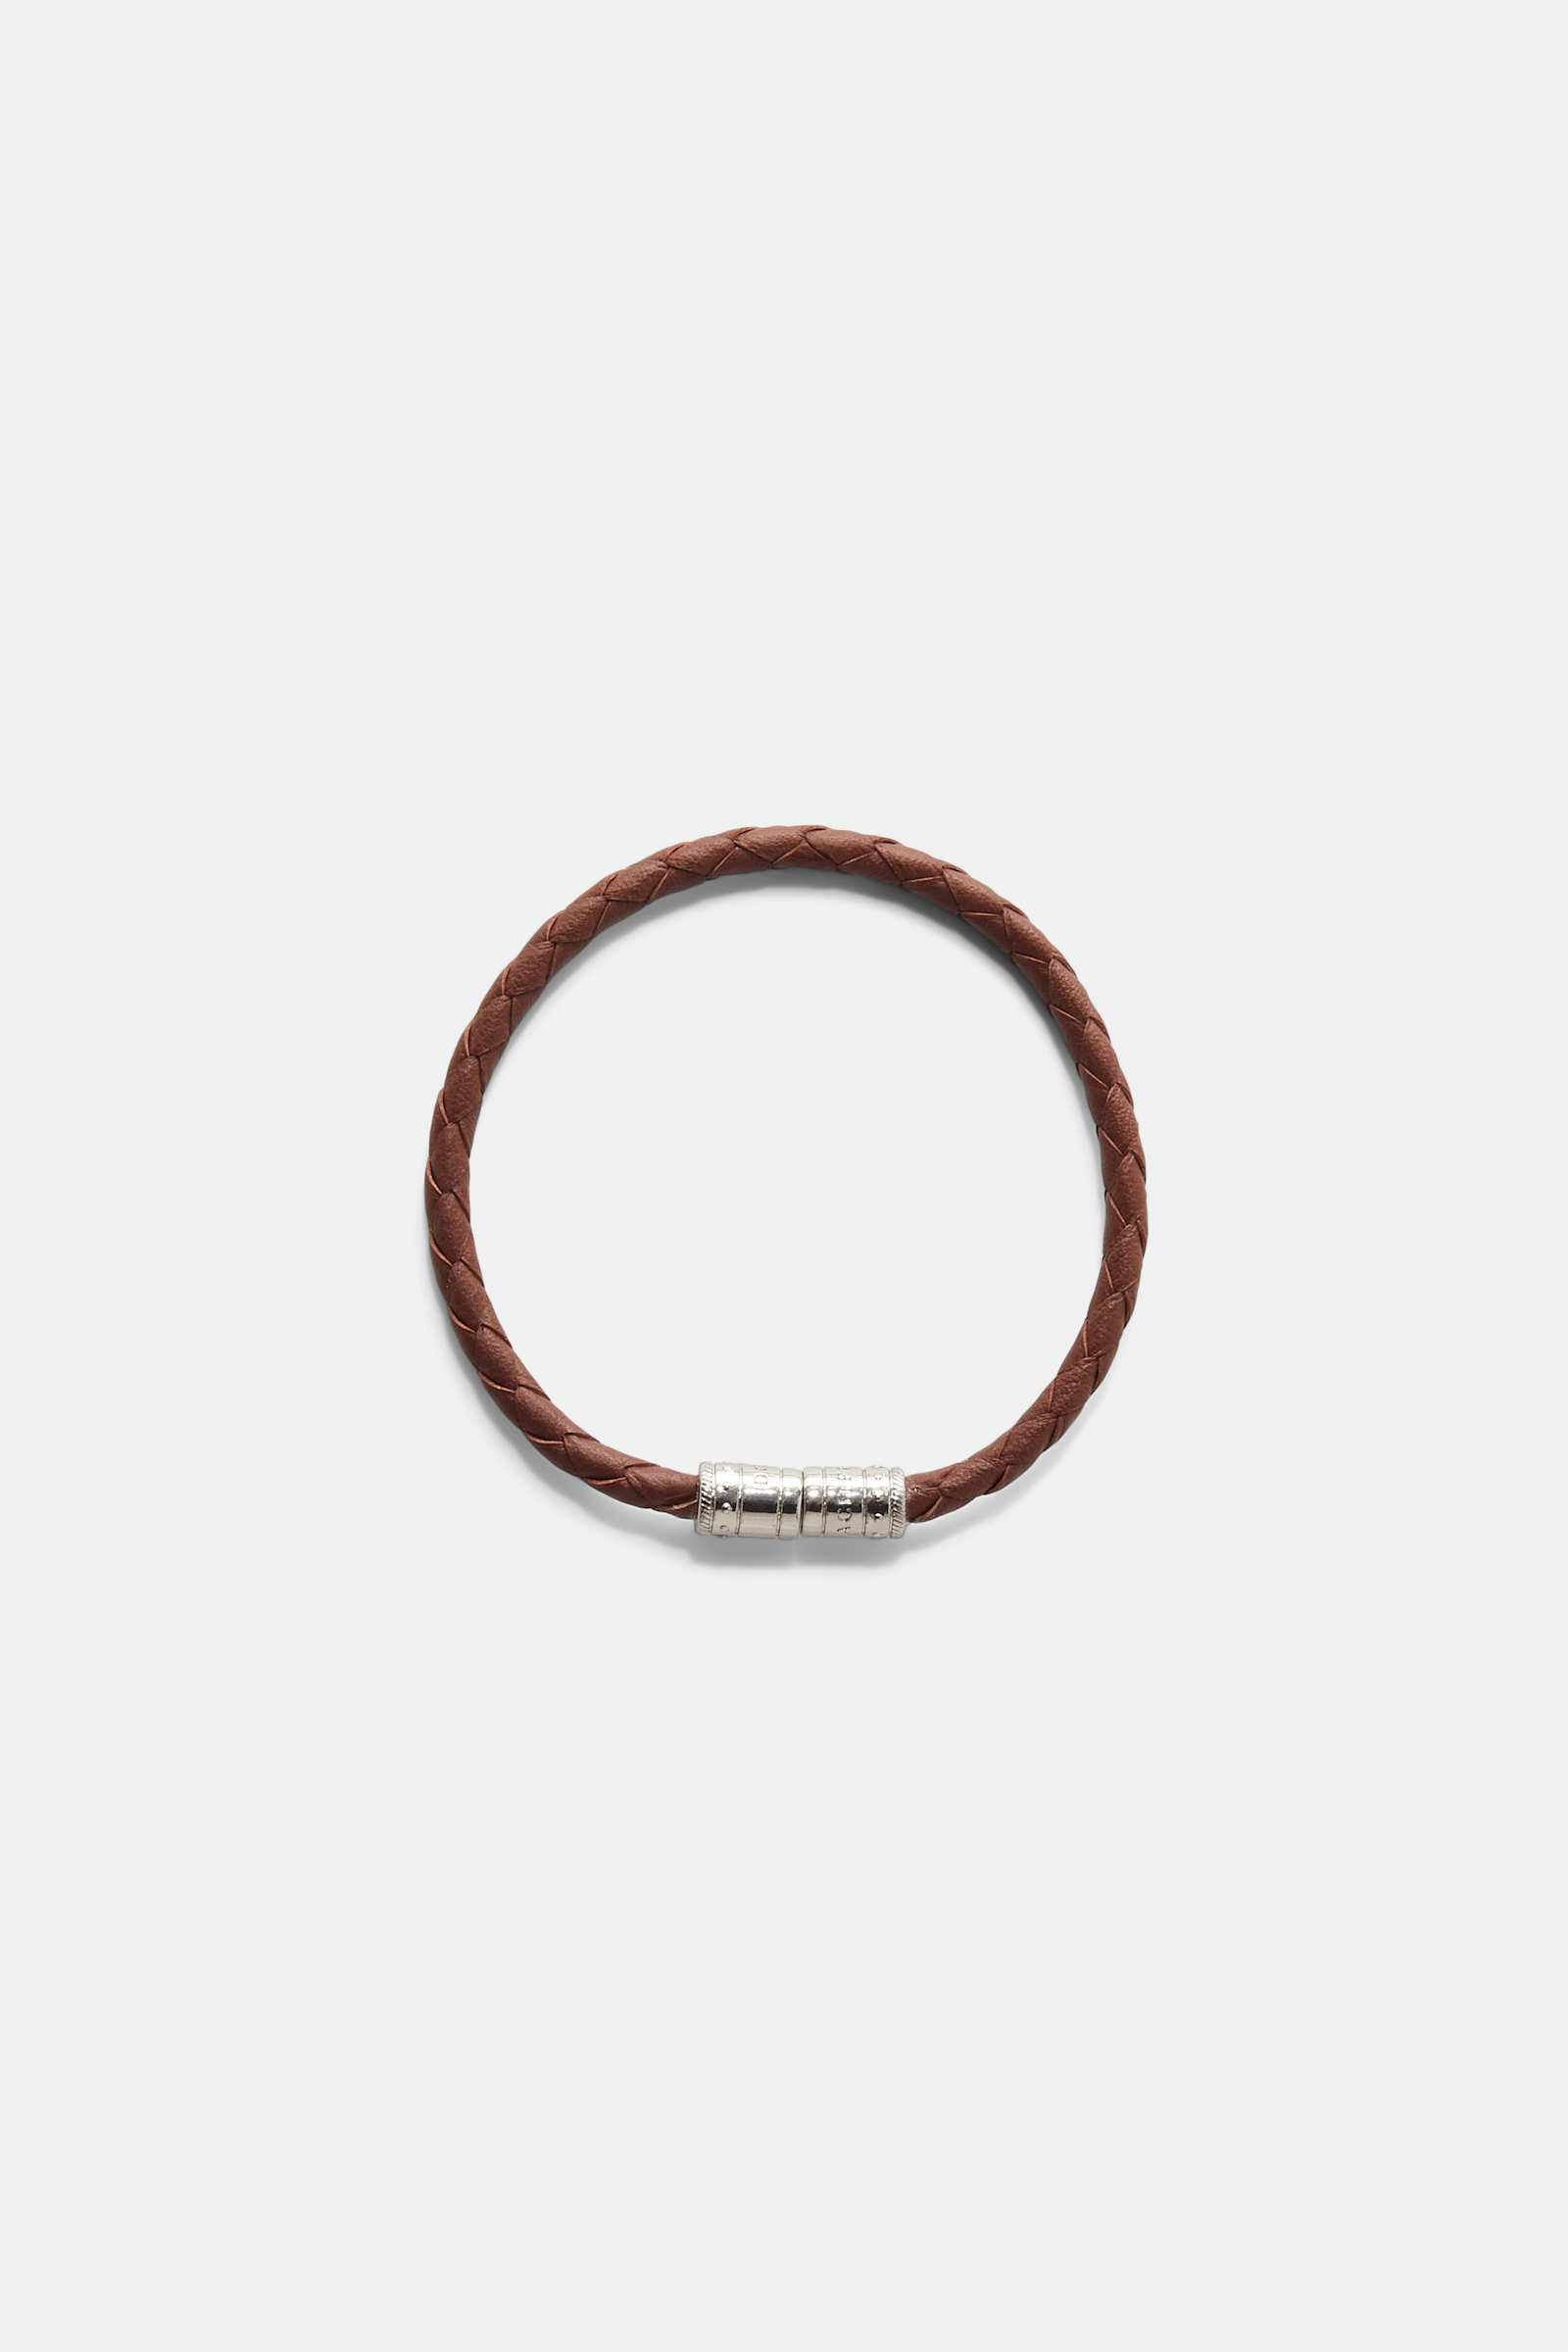 Dorothee Schumacher Set of three woven leather cord bracelets cognac + white with bordeaux mix